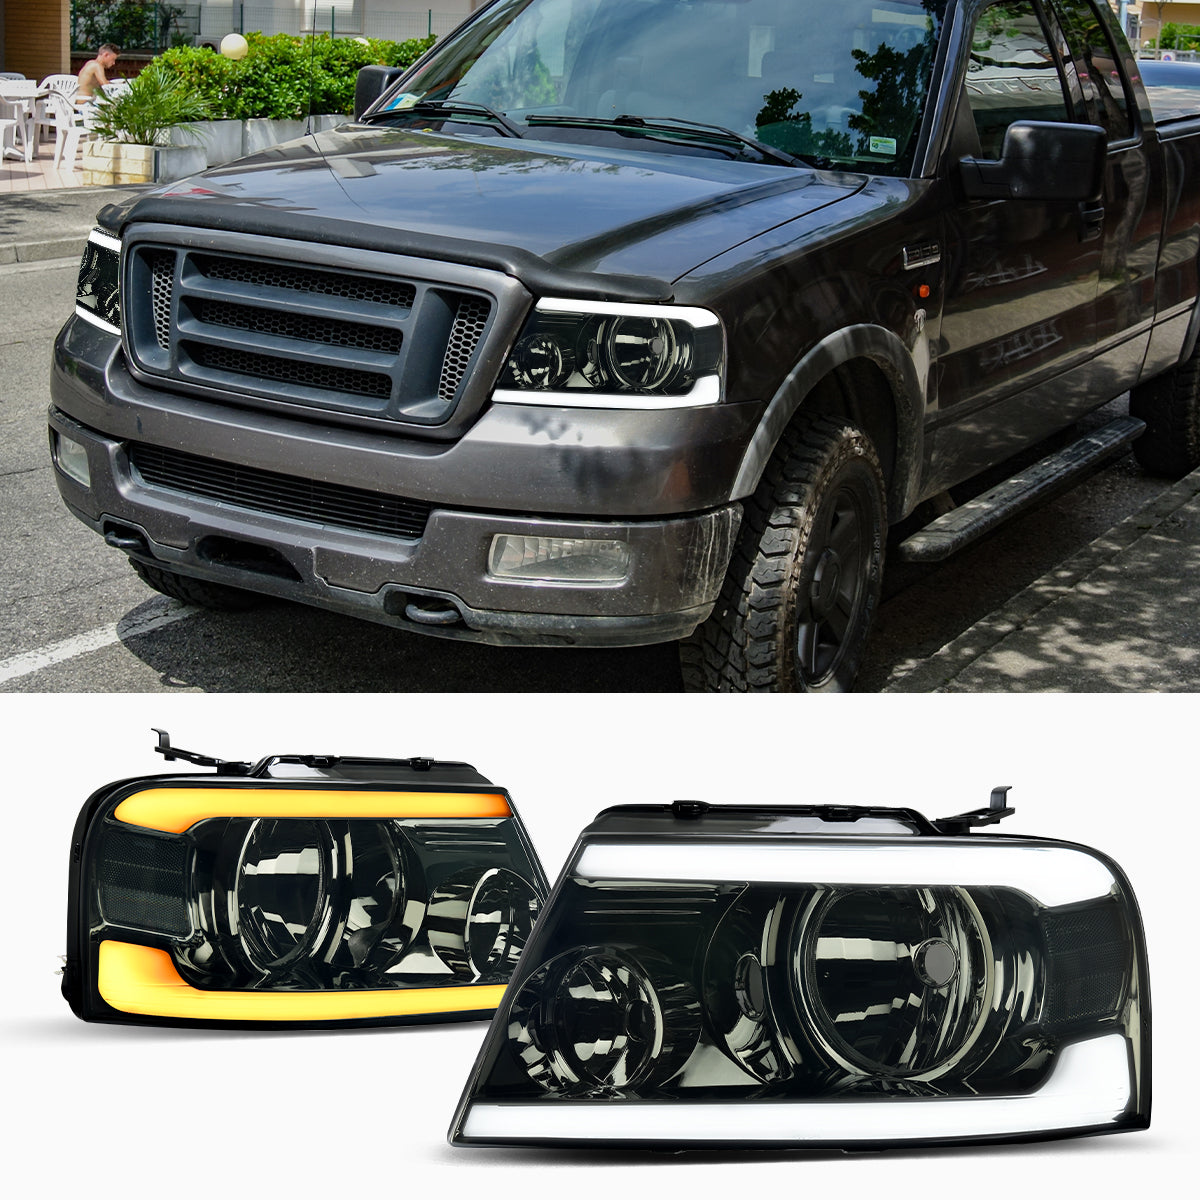 2004-2008 Ford F150 Pickup LED Headlights for Headlight Replacement –  YITAMotor